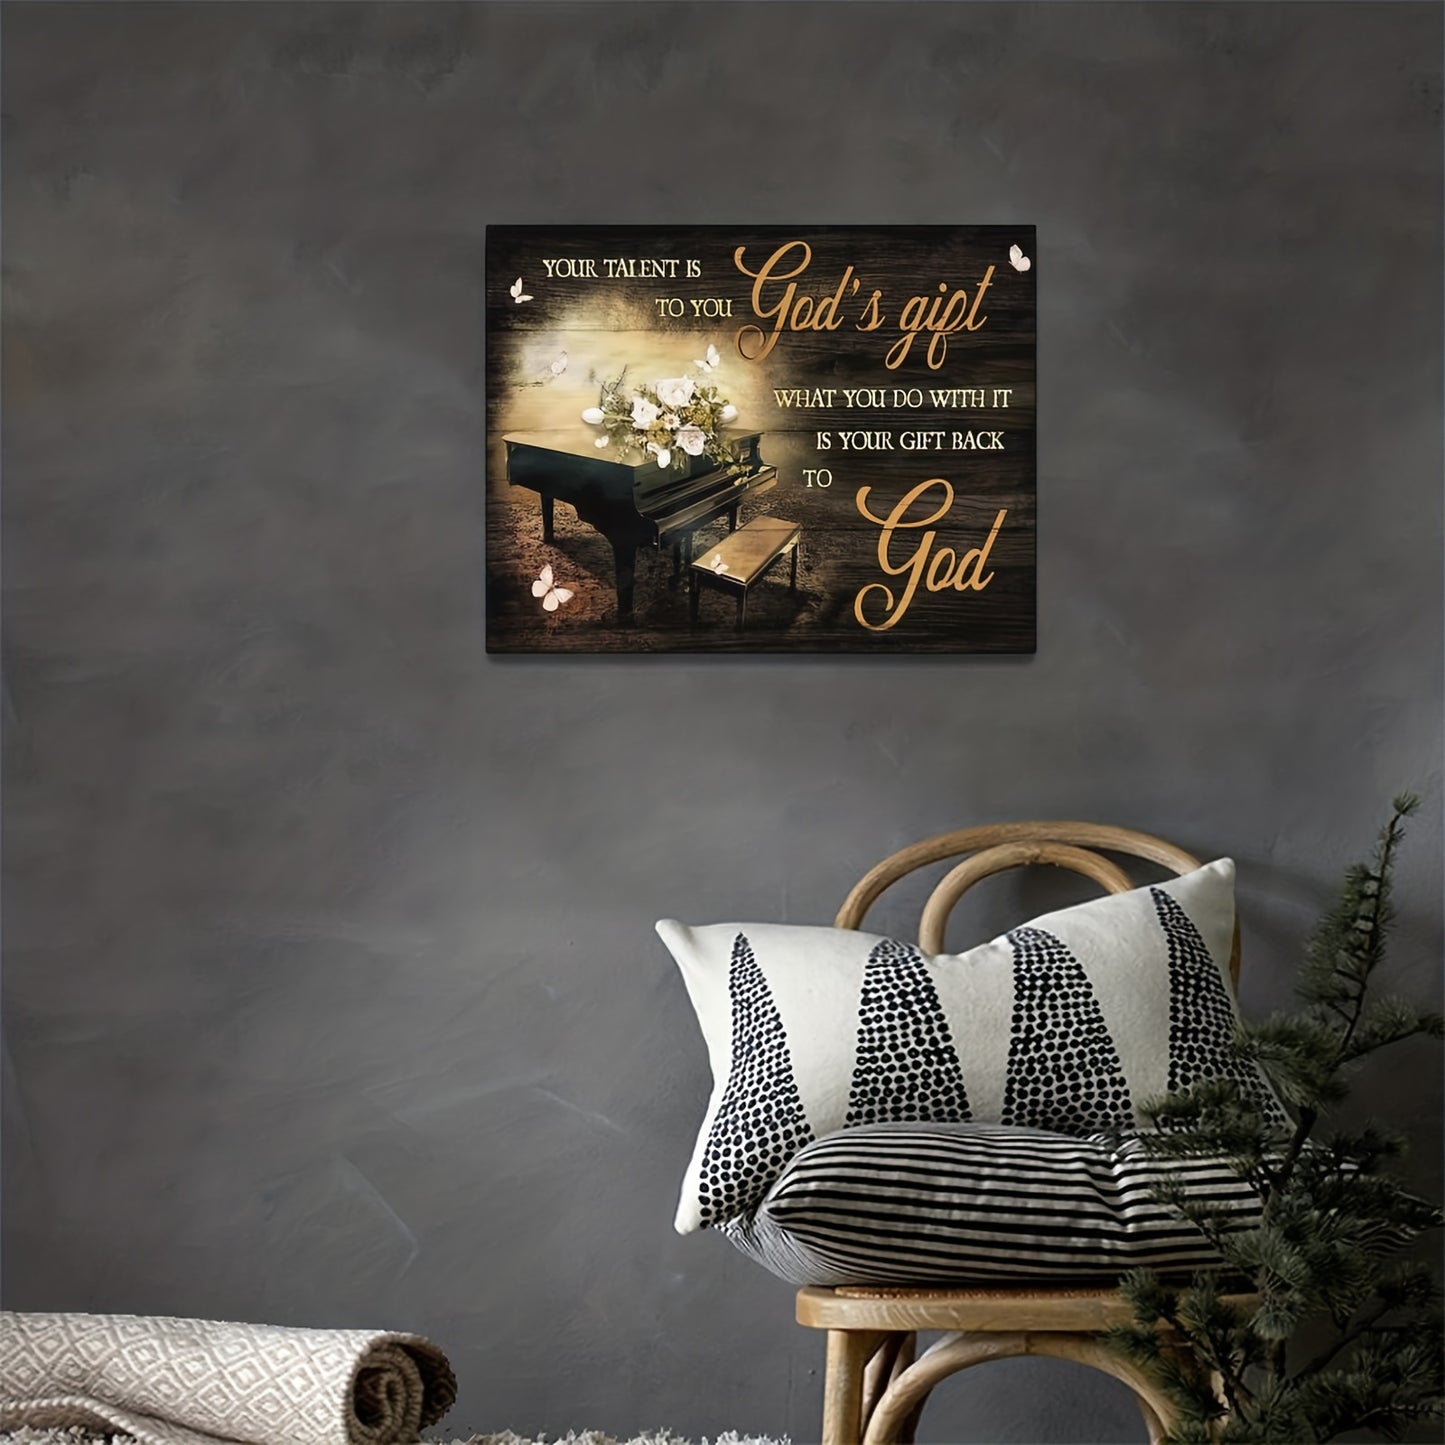 Your Talent Is God's Gift To You Christian Wall Decor  No Frame claimedbygoddesigns